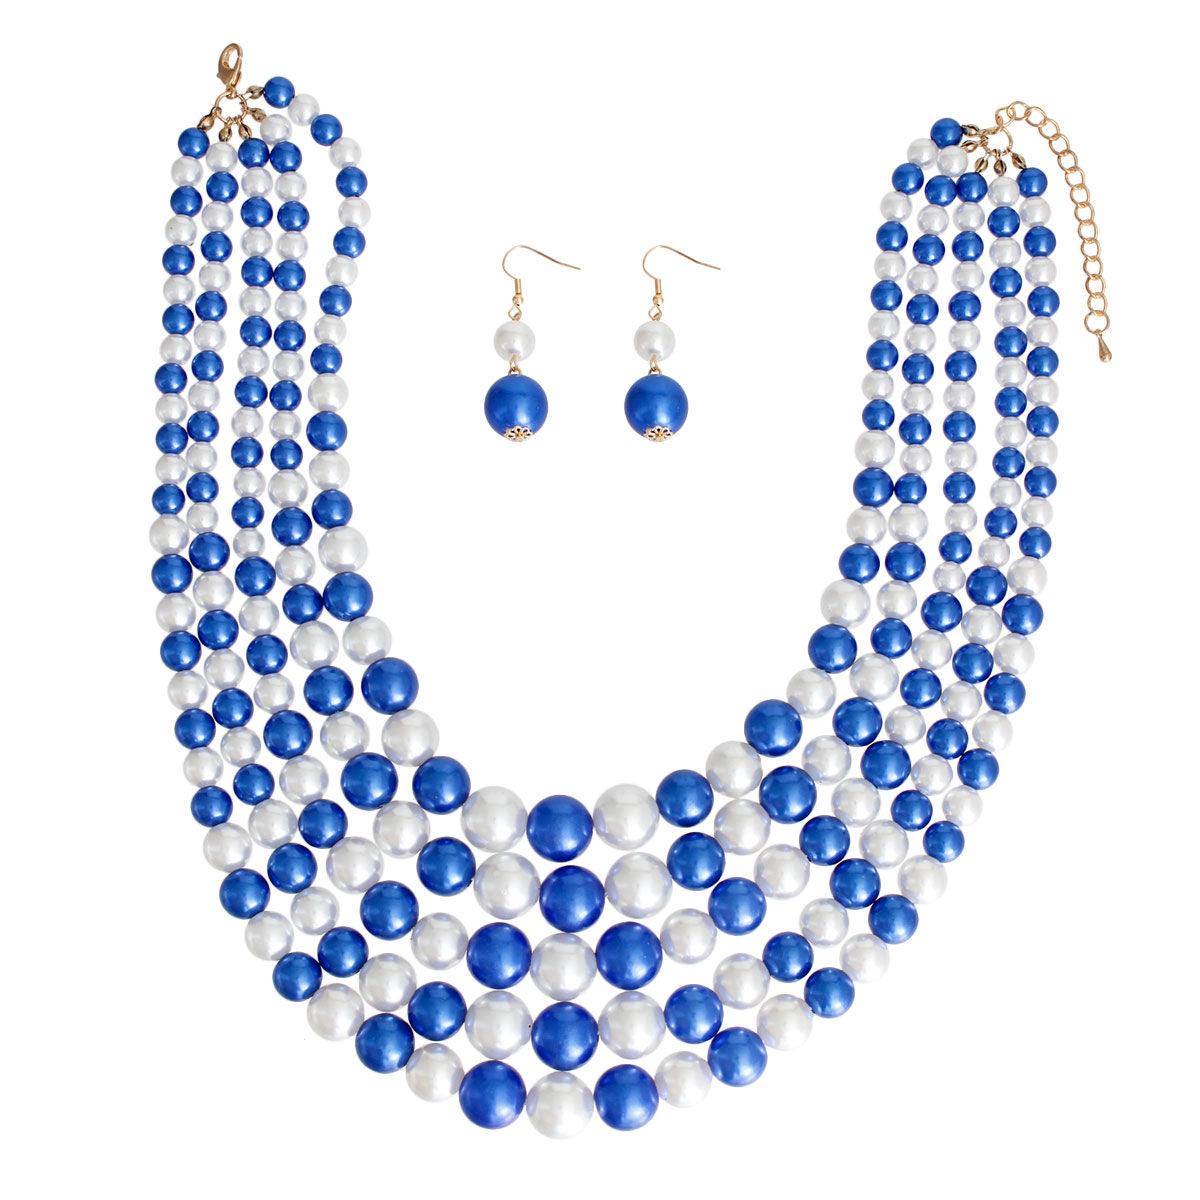 Blue & White Pearl 5 Strand Necklace and Dangle Earrings for Elegance